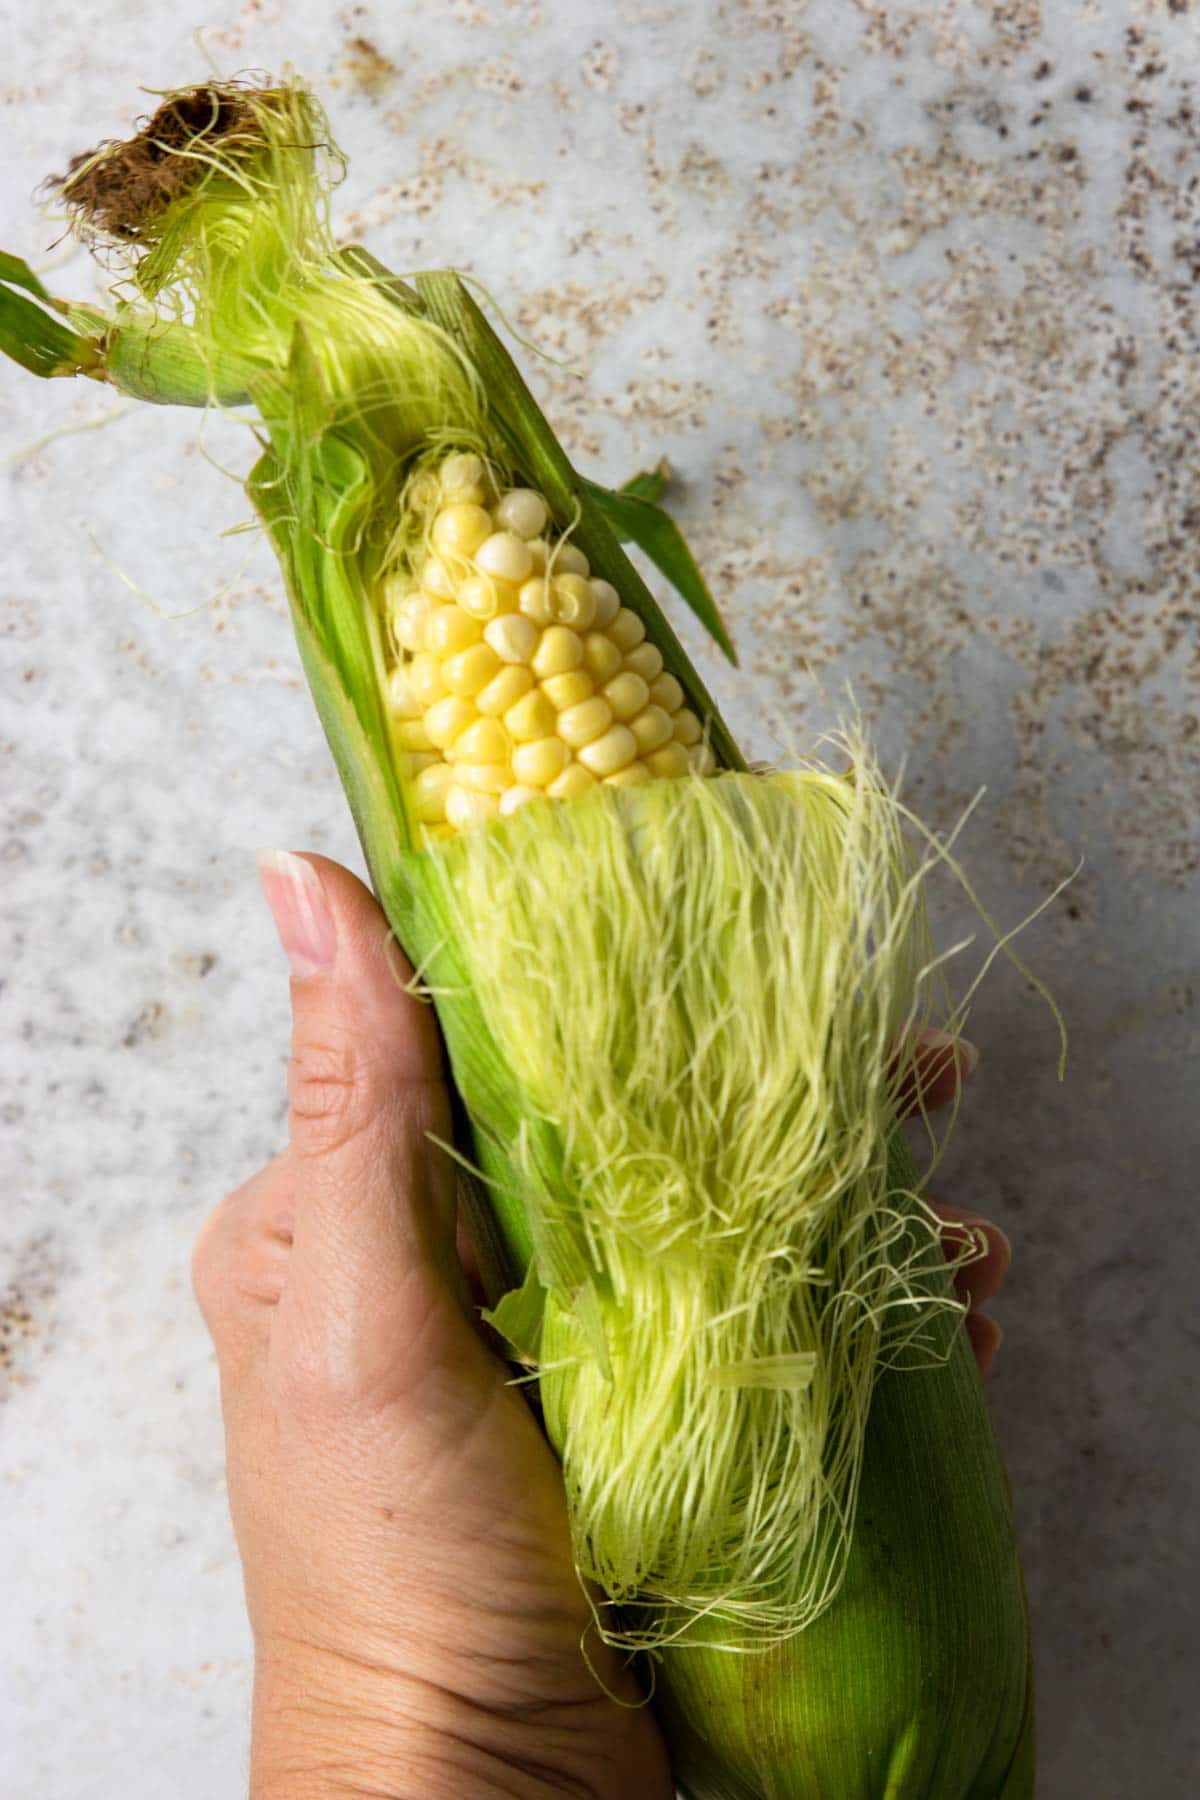 Fresh ear of corn with the husk and silk pulled back